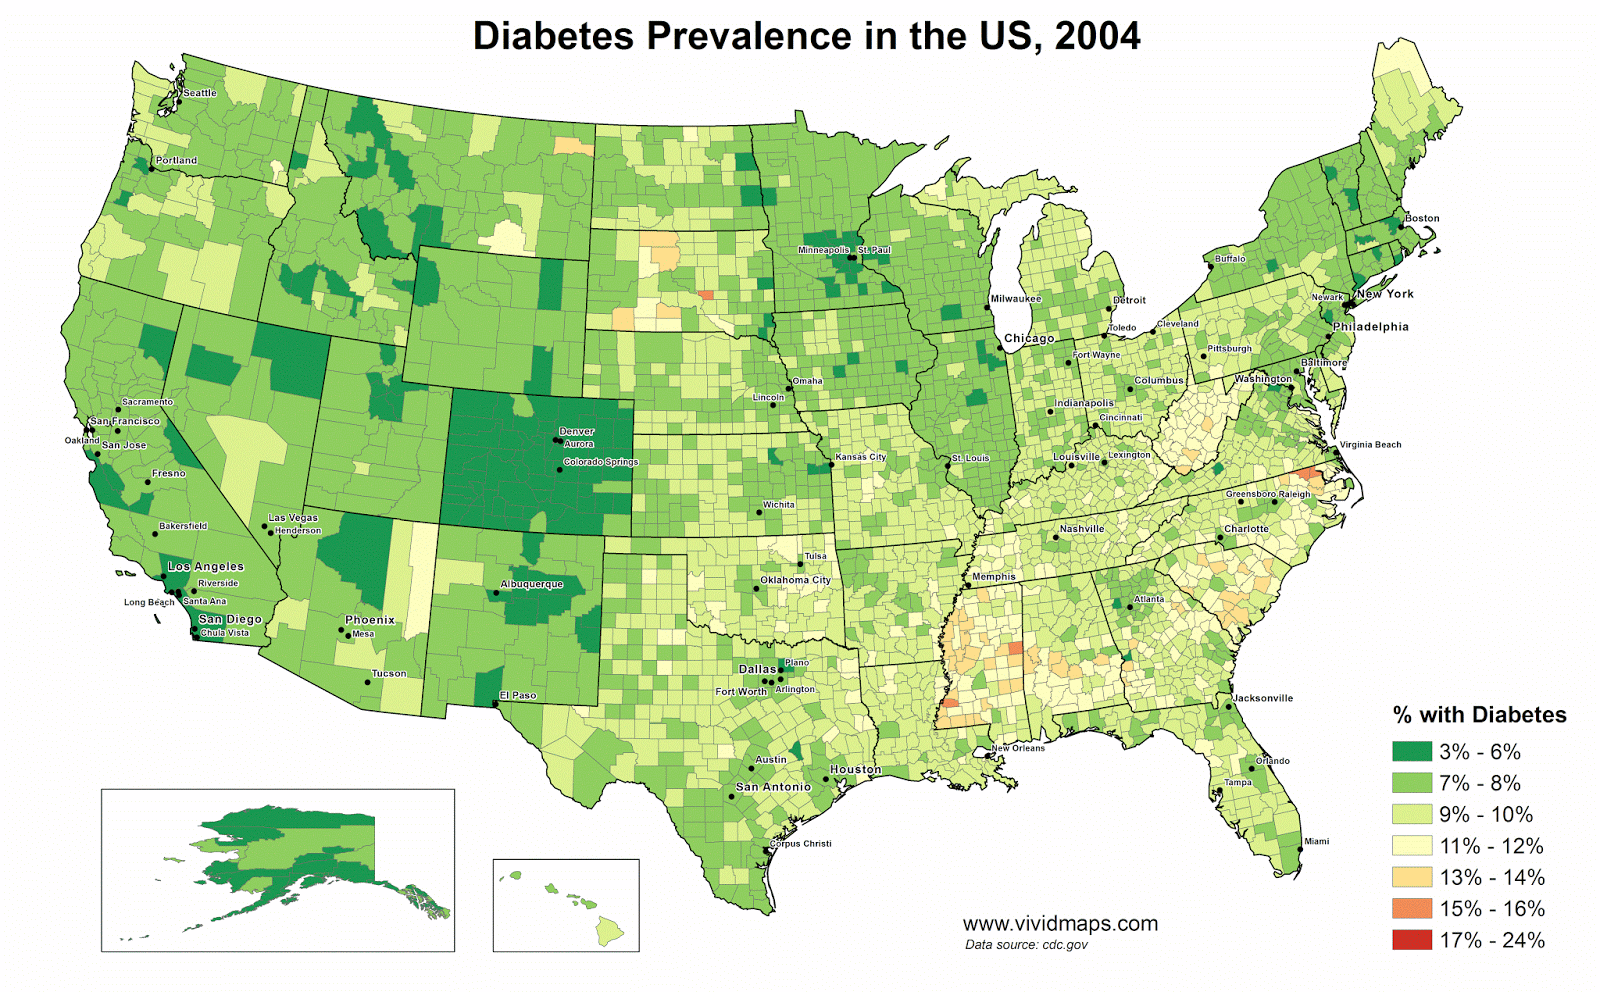 Diabetes prevalence in the United States